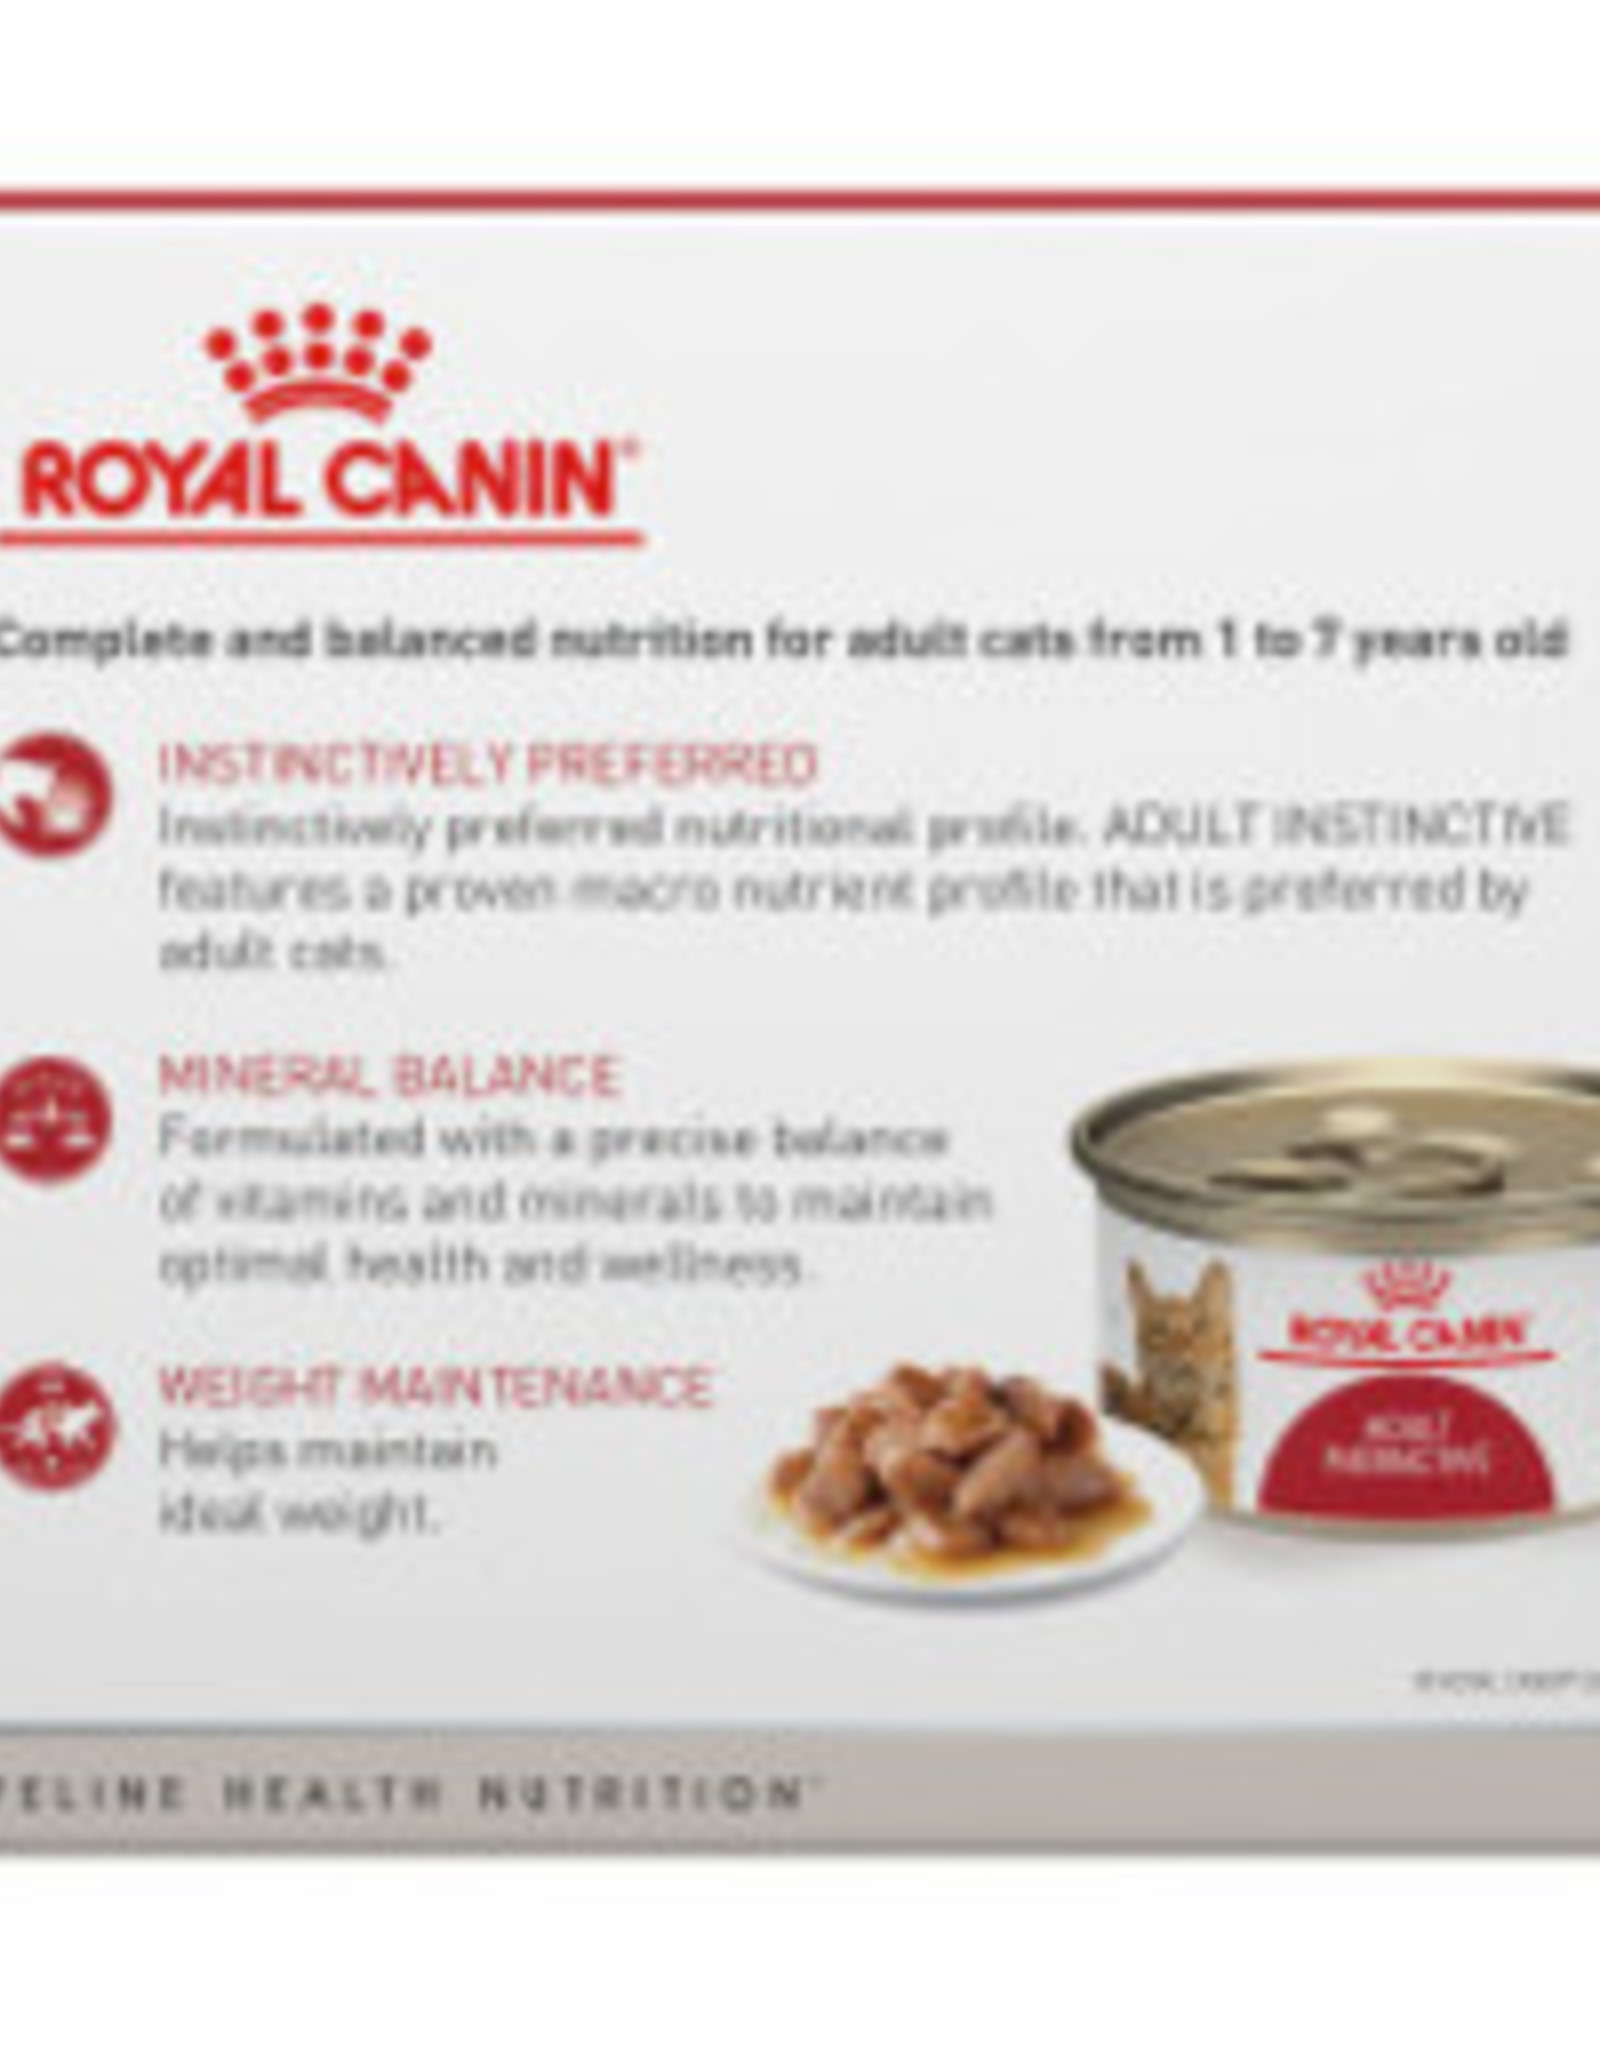 ROYAL CANIN ROYAL CANIN CAT CAN ADULT INSTINCTIVE 3OZ CASE OF 24